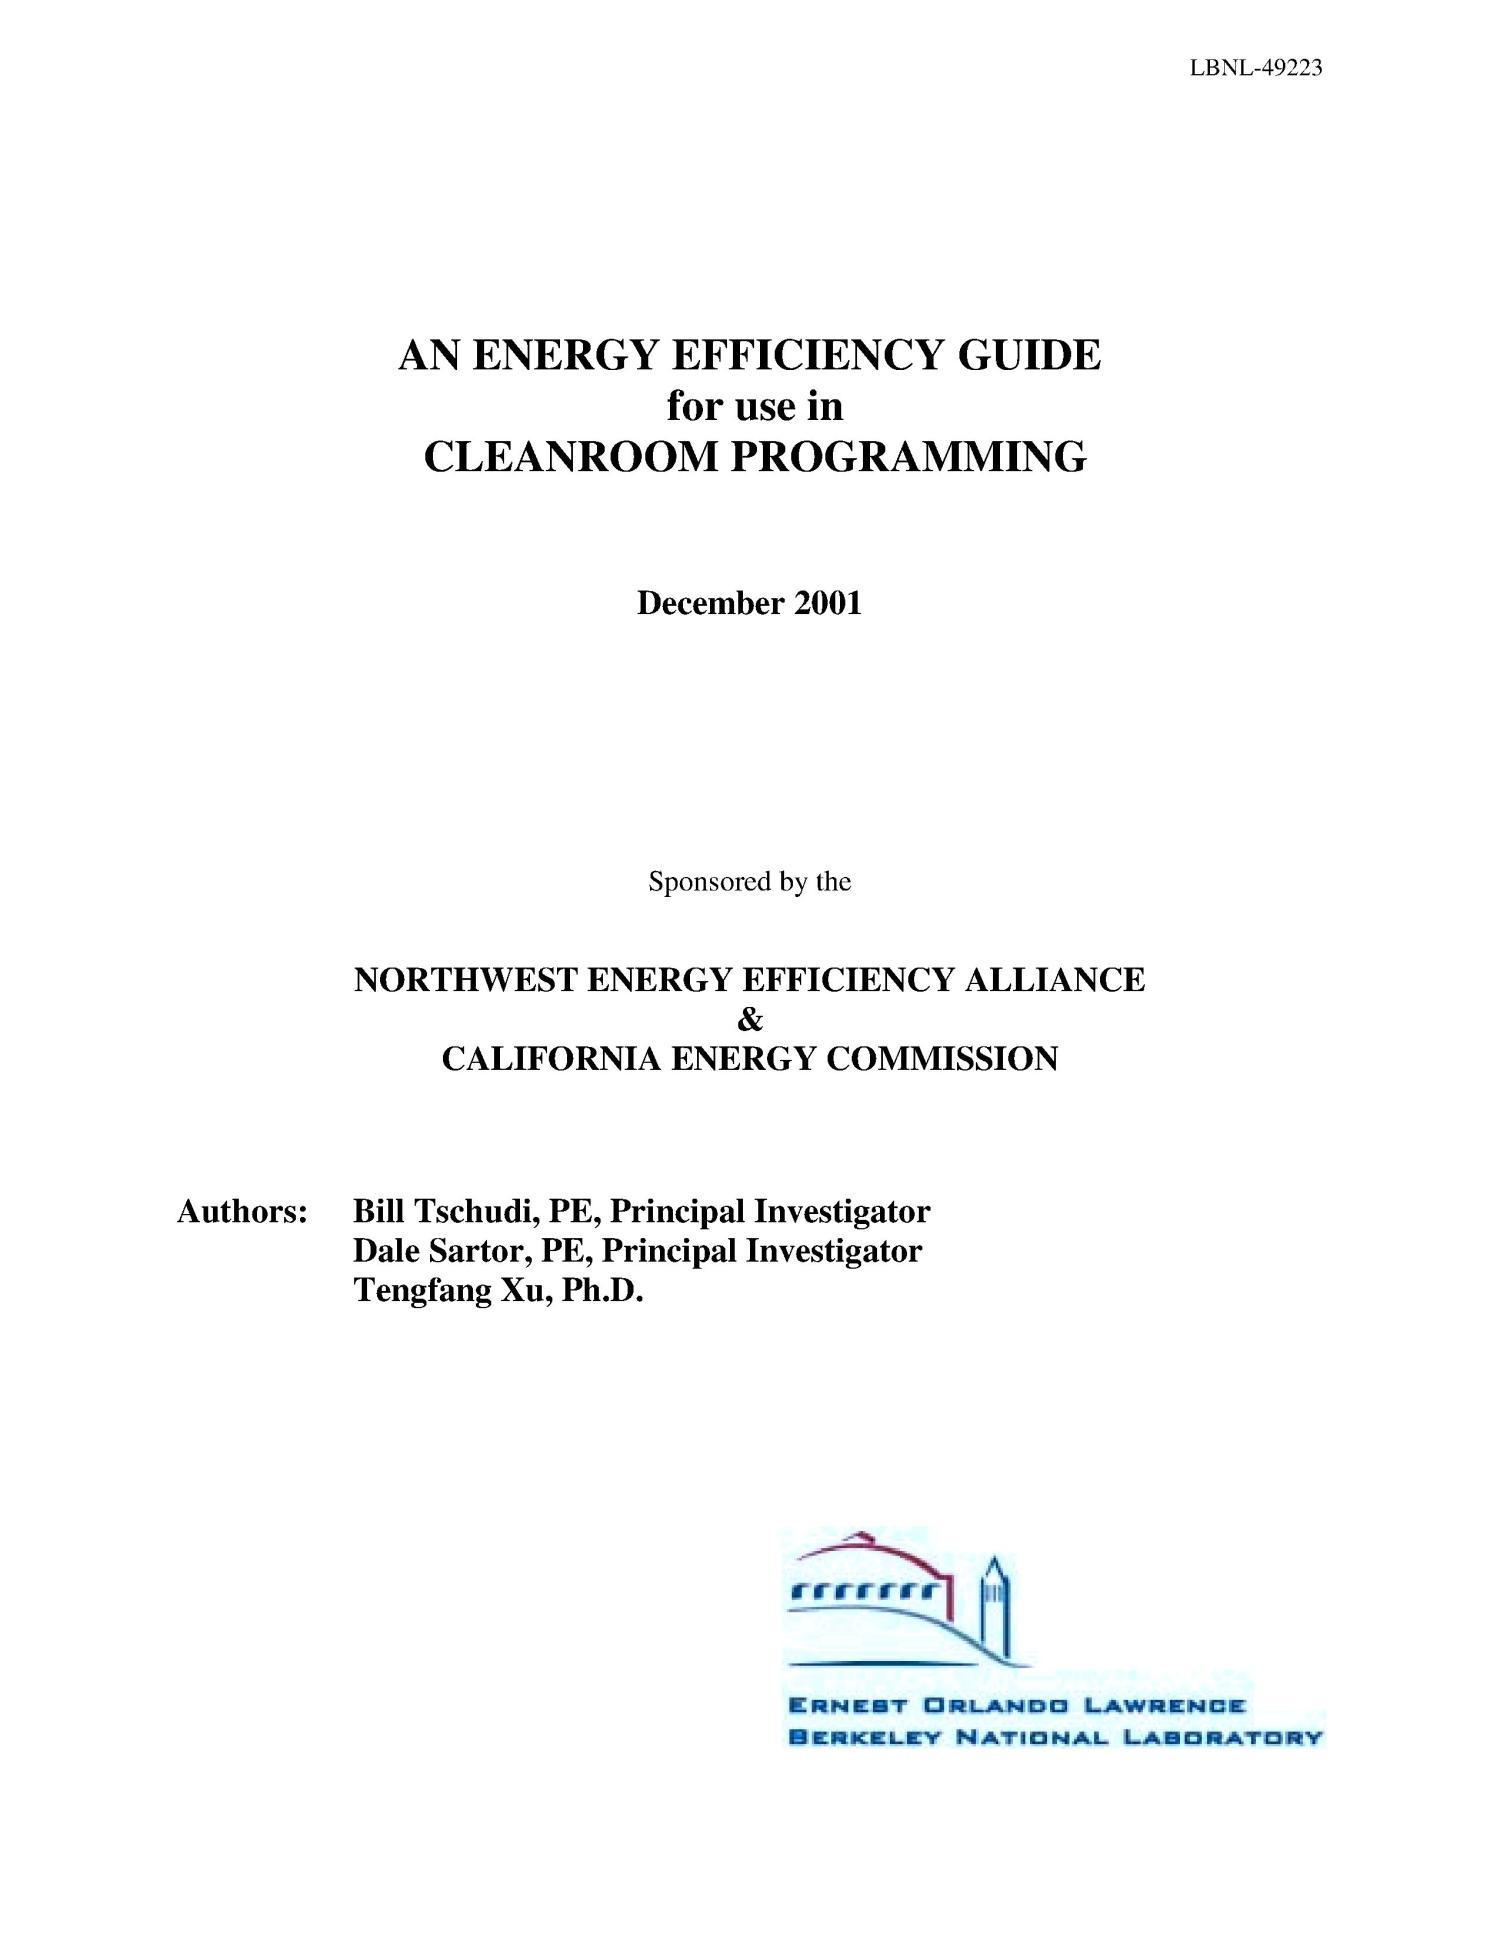 An energy efficiency guide for use in cleanroom programming
                                                
                                                    [Sequence #]: 1 of 42
                                                